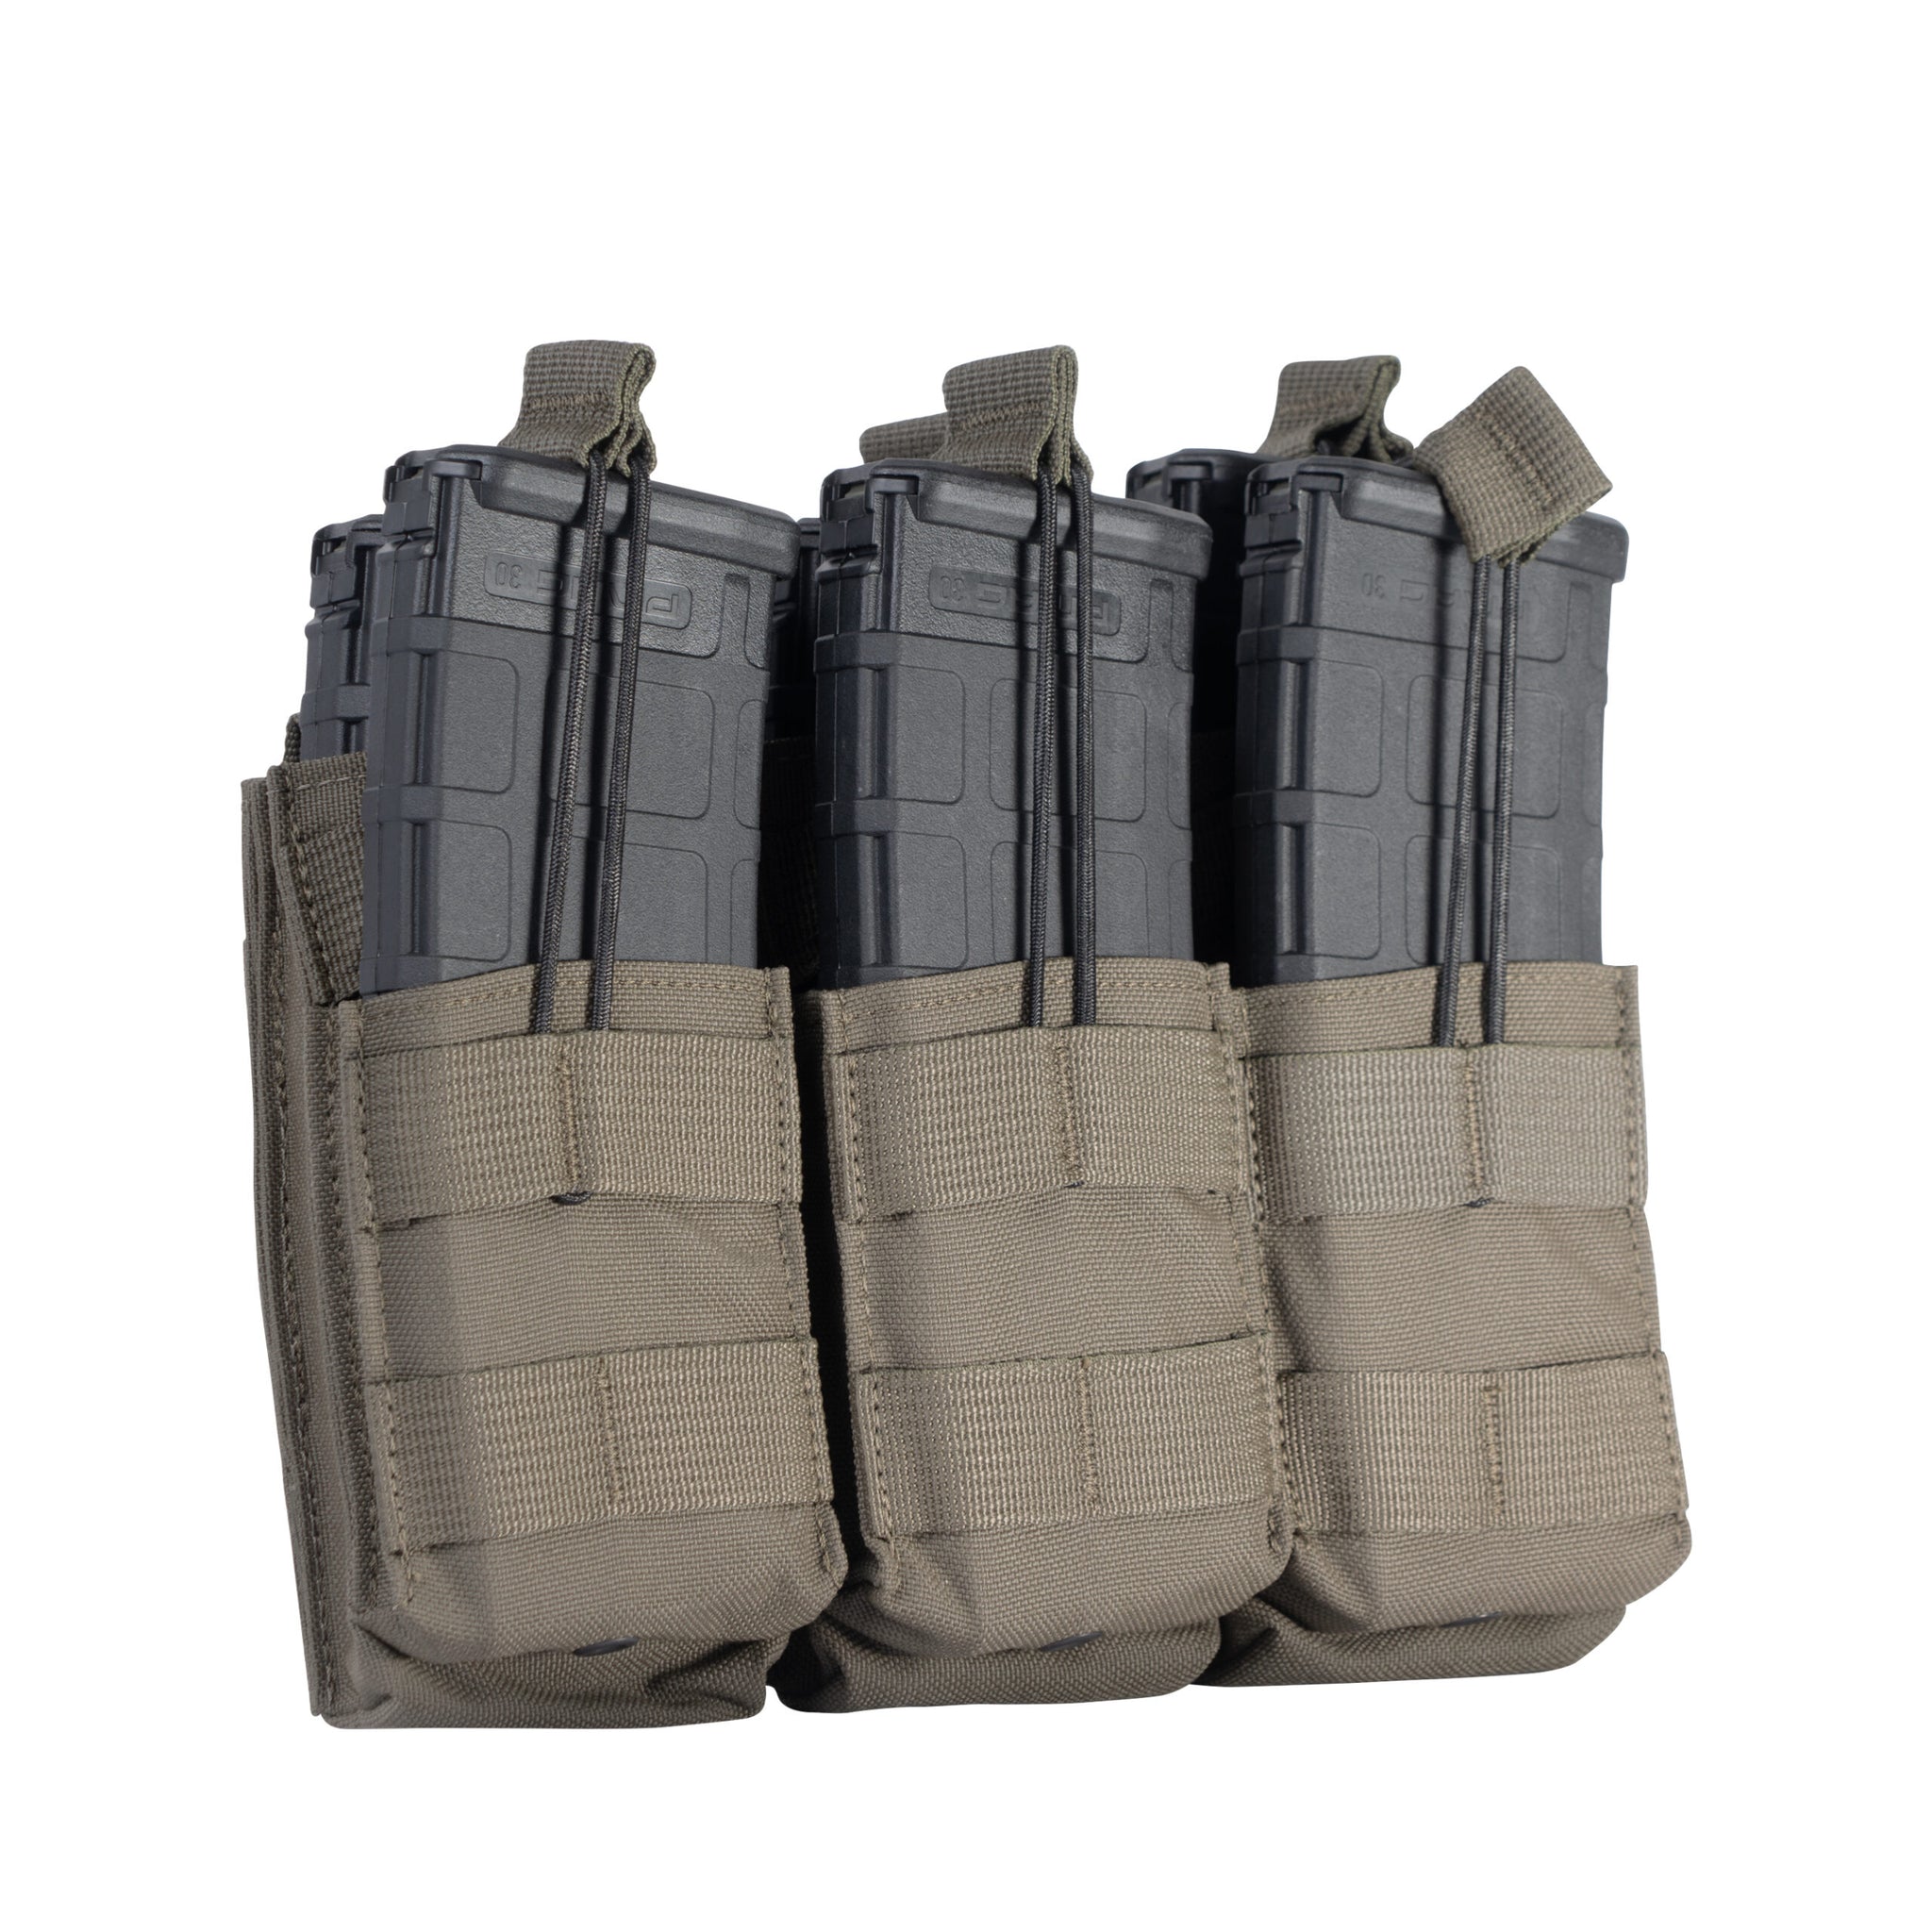 CAG Triple Stacker M4 Mag Pouch Triple Stacker M4 Mag Pouch